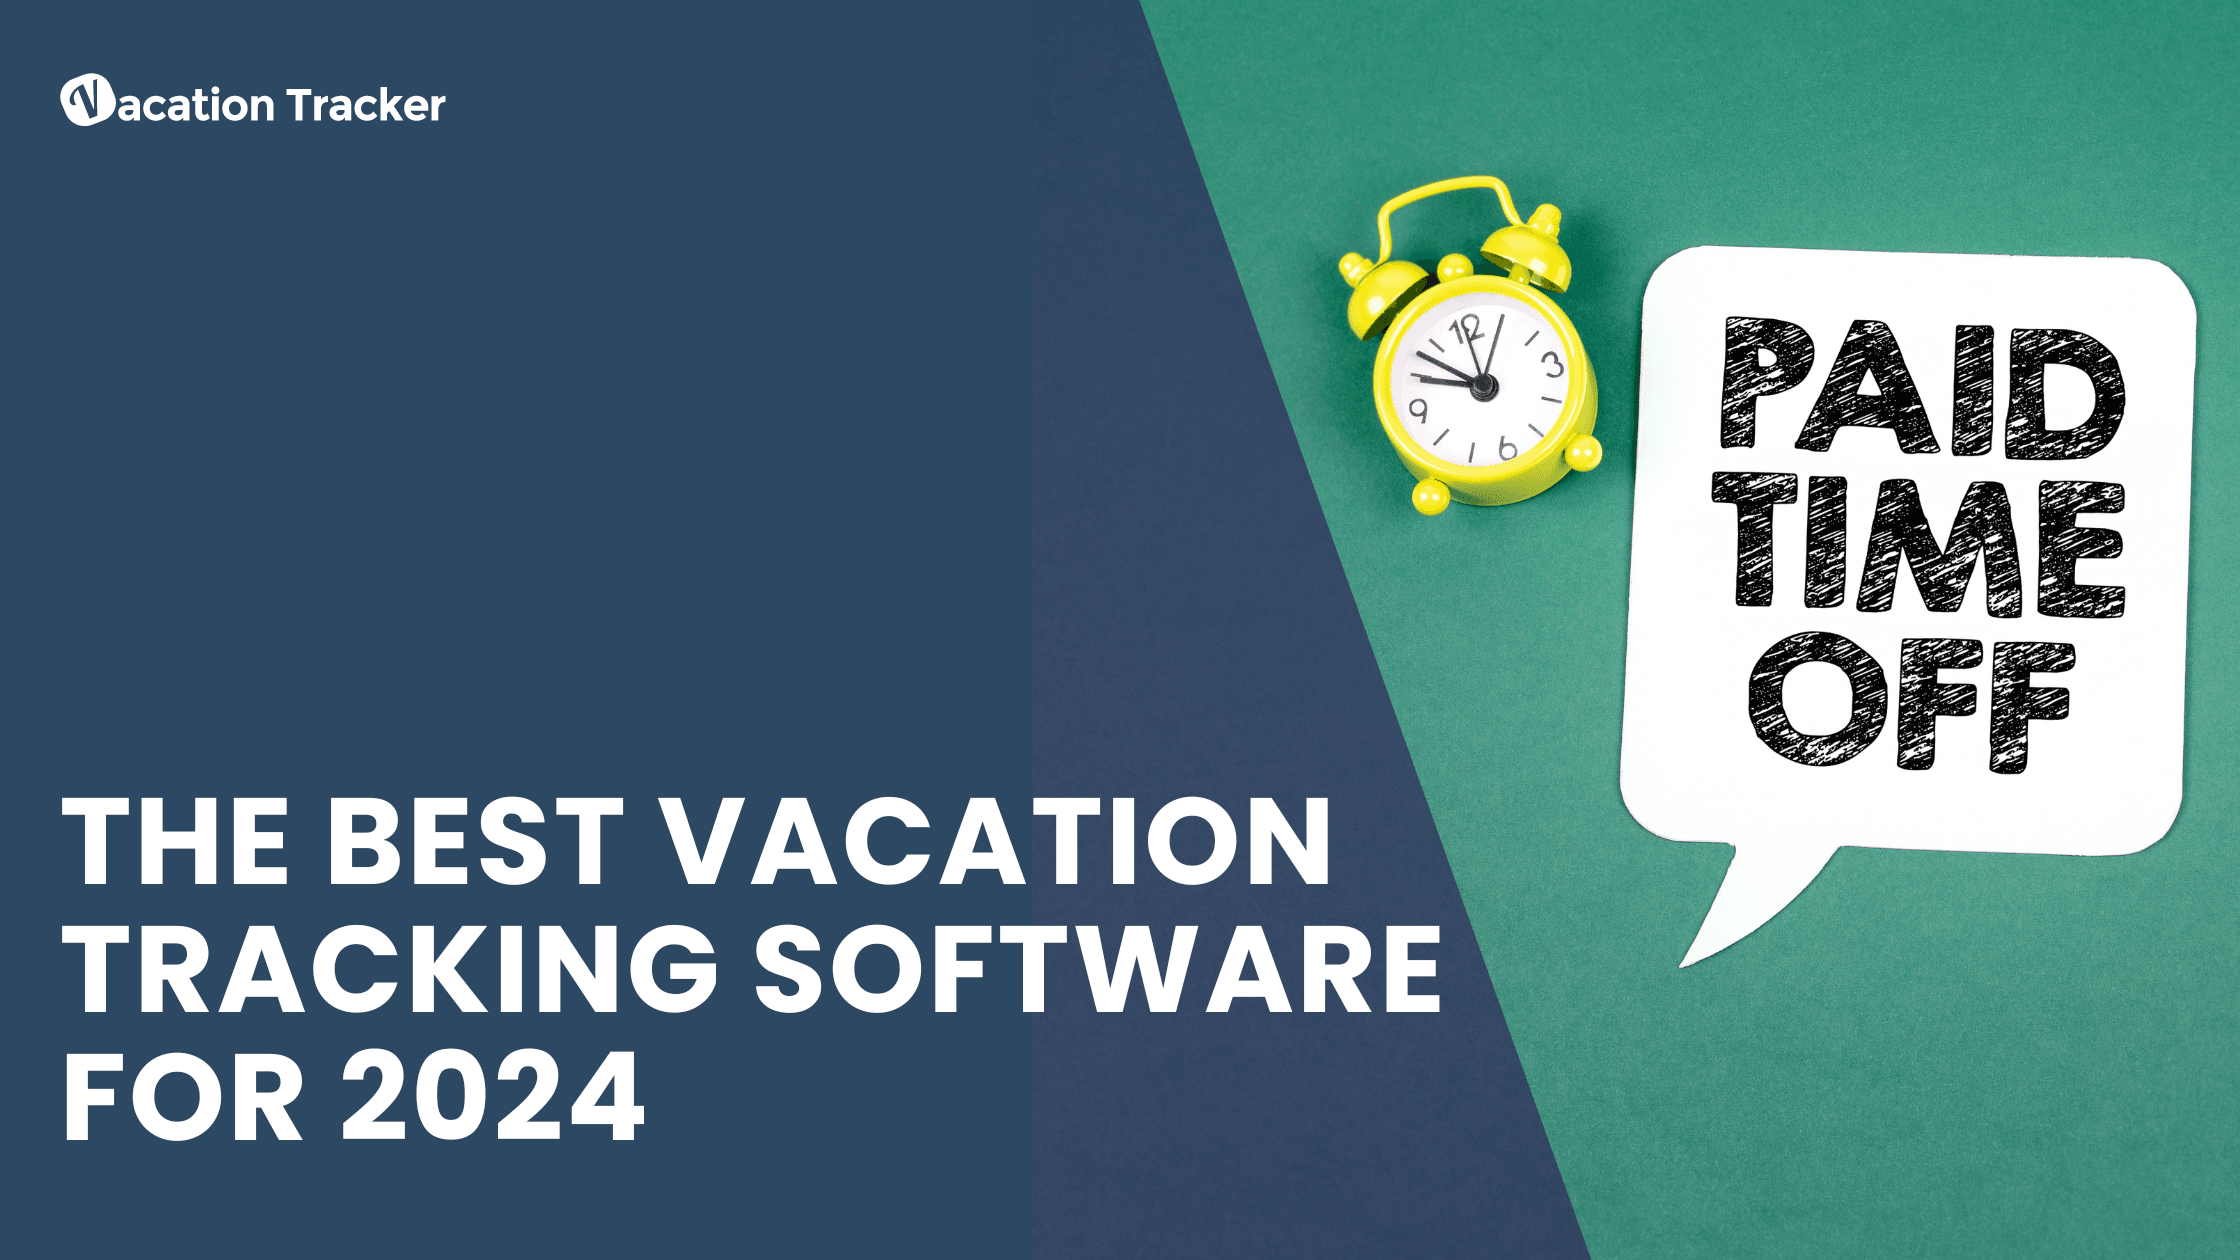 Expert Review: Finding the Best Vacation Tracking Software for 2024